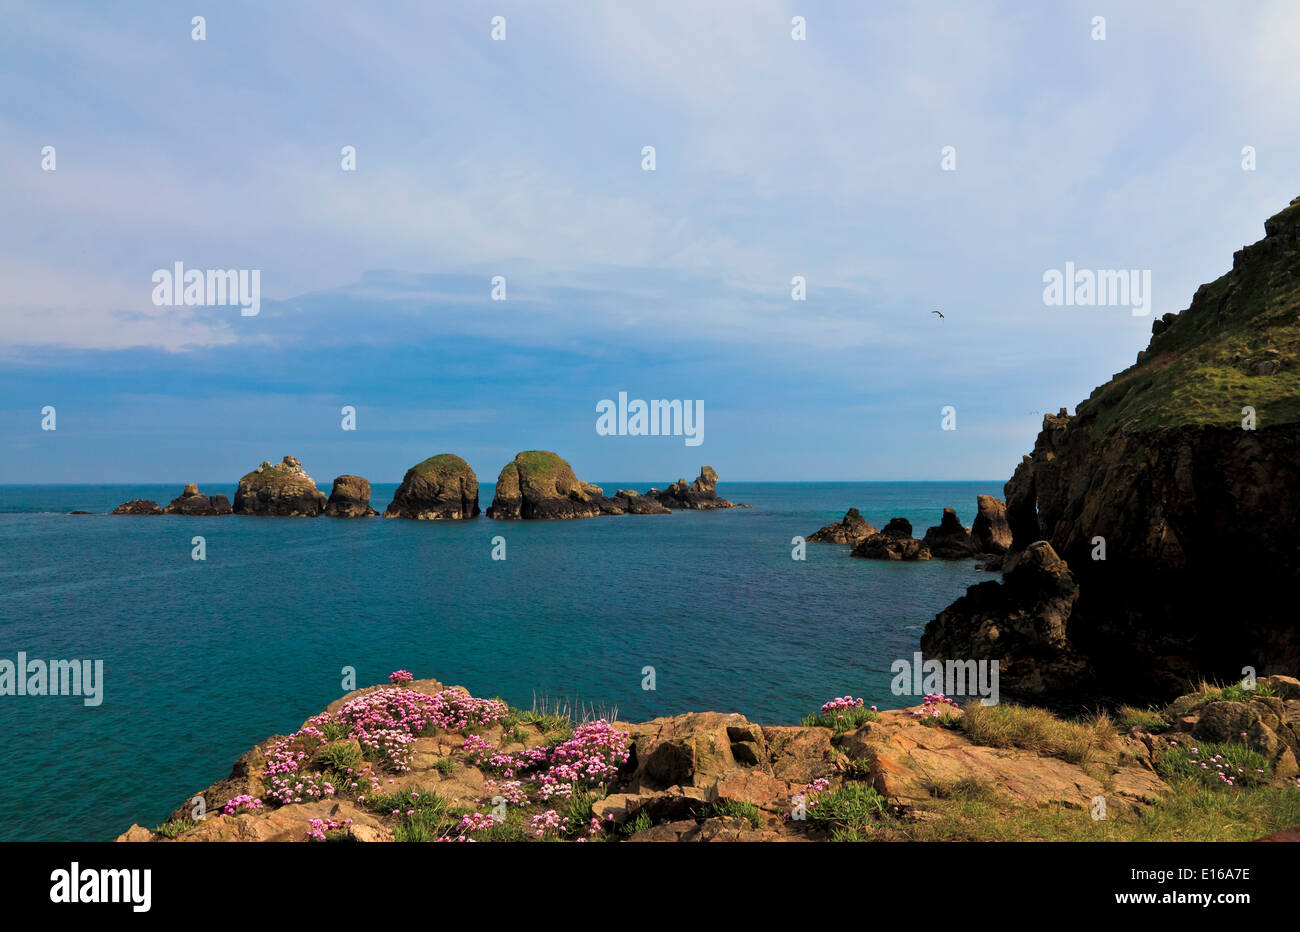 9240. Coastal View near Creux Harbour, Sark, Channel Islands, UK, Europe Stock Photo